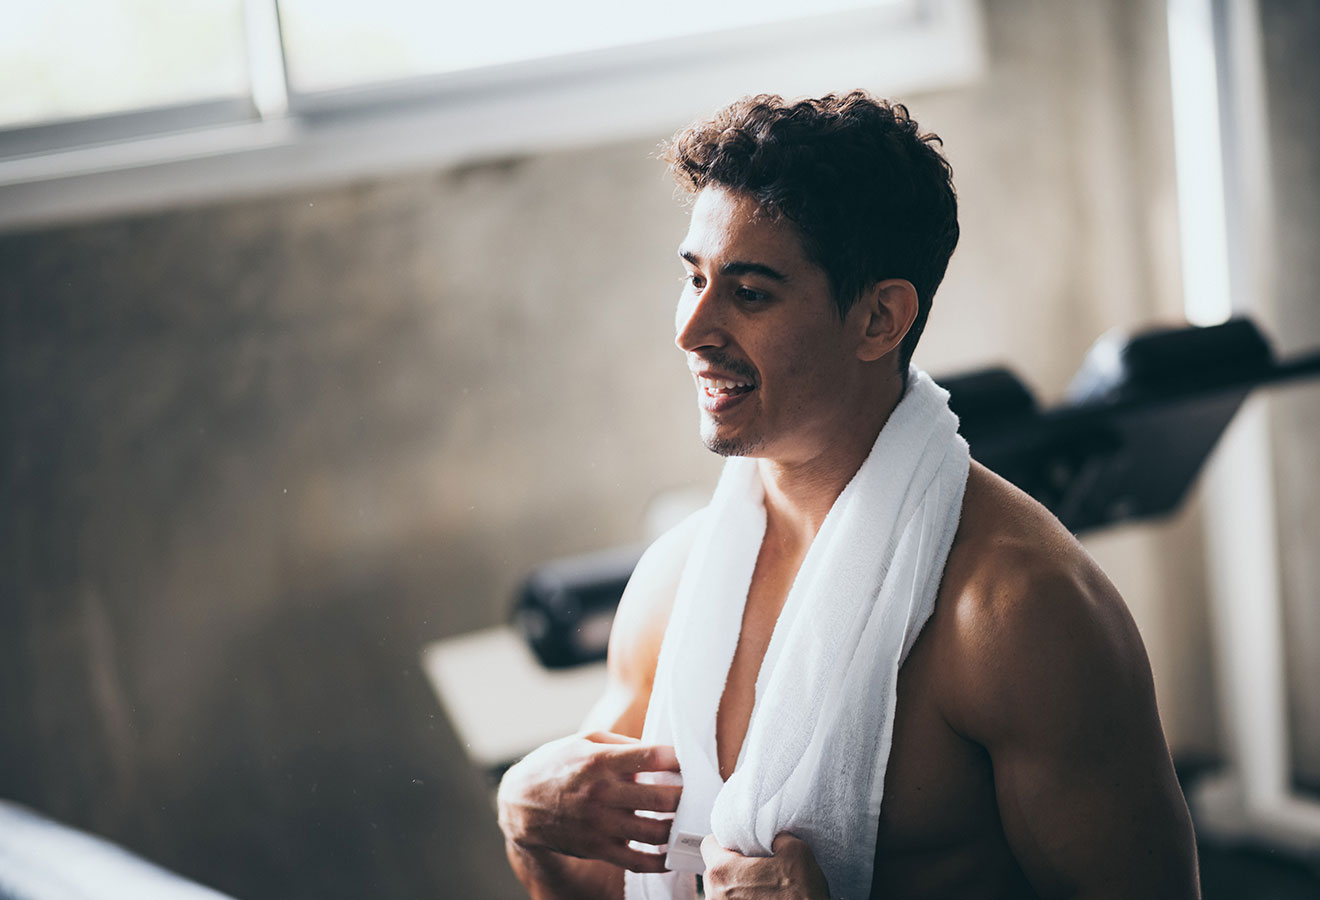 Man standing in a gym with a towel around his neck and no shirt on